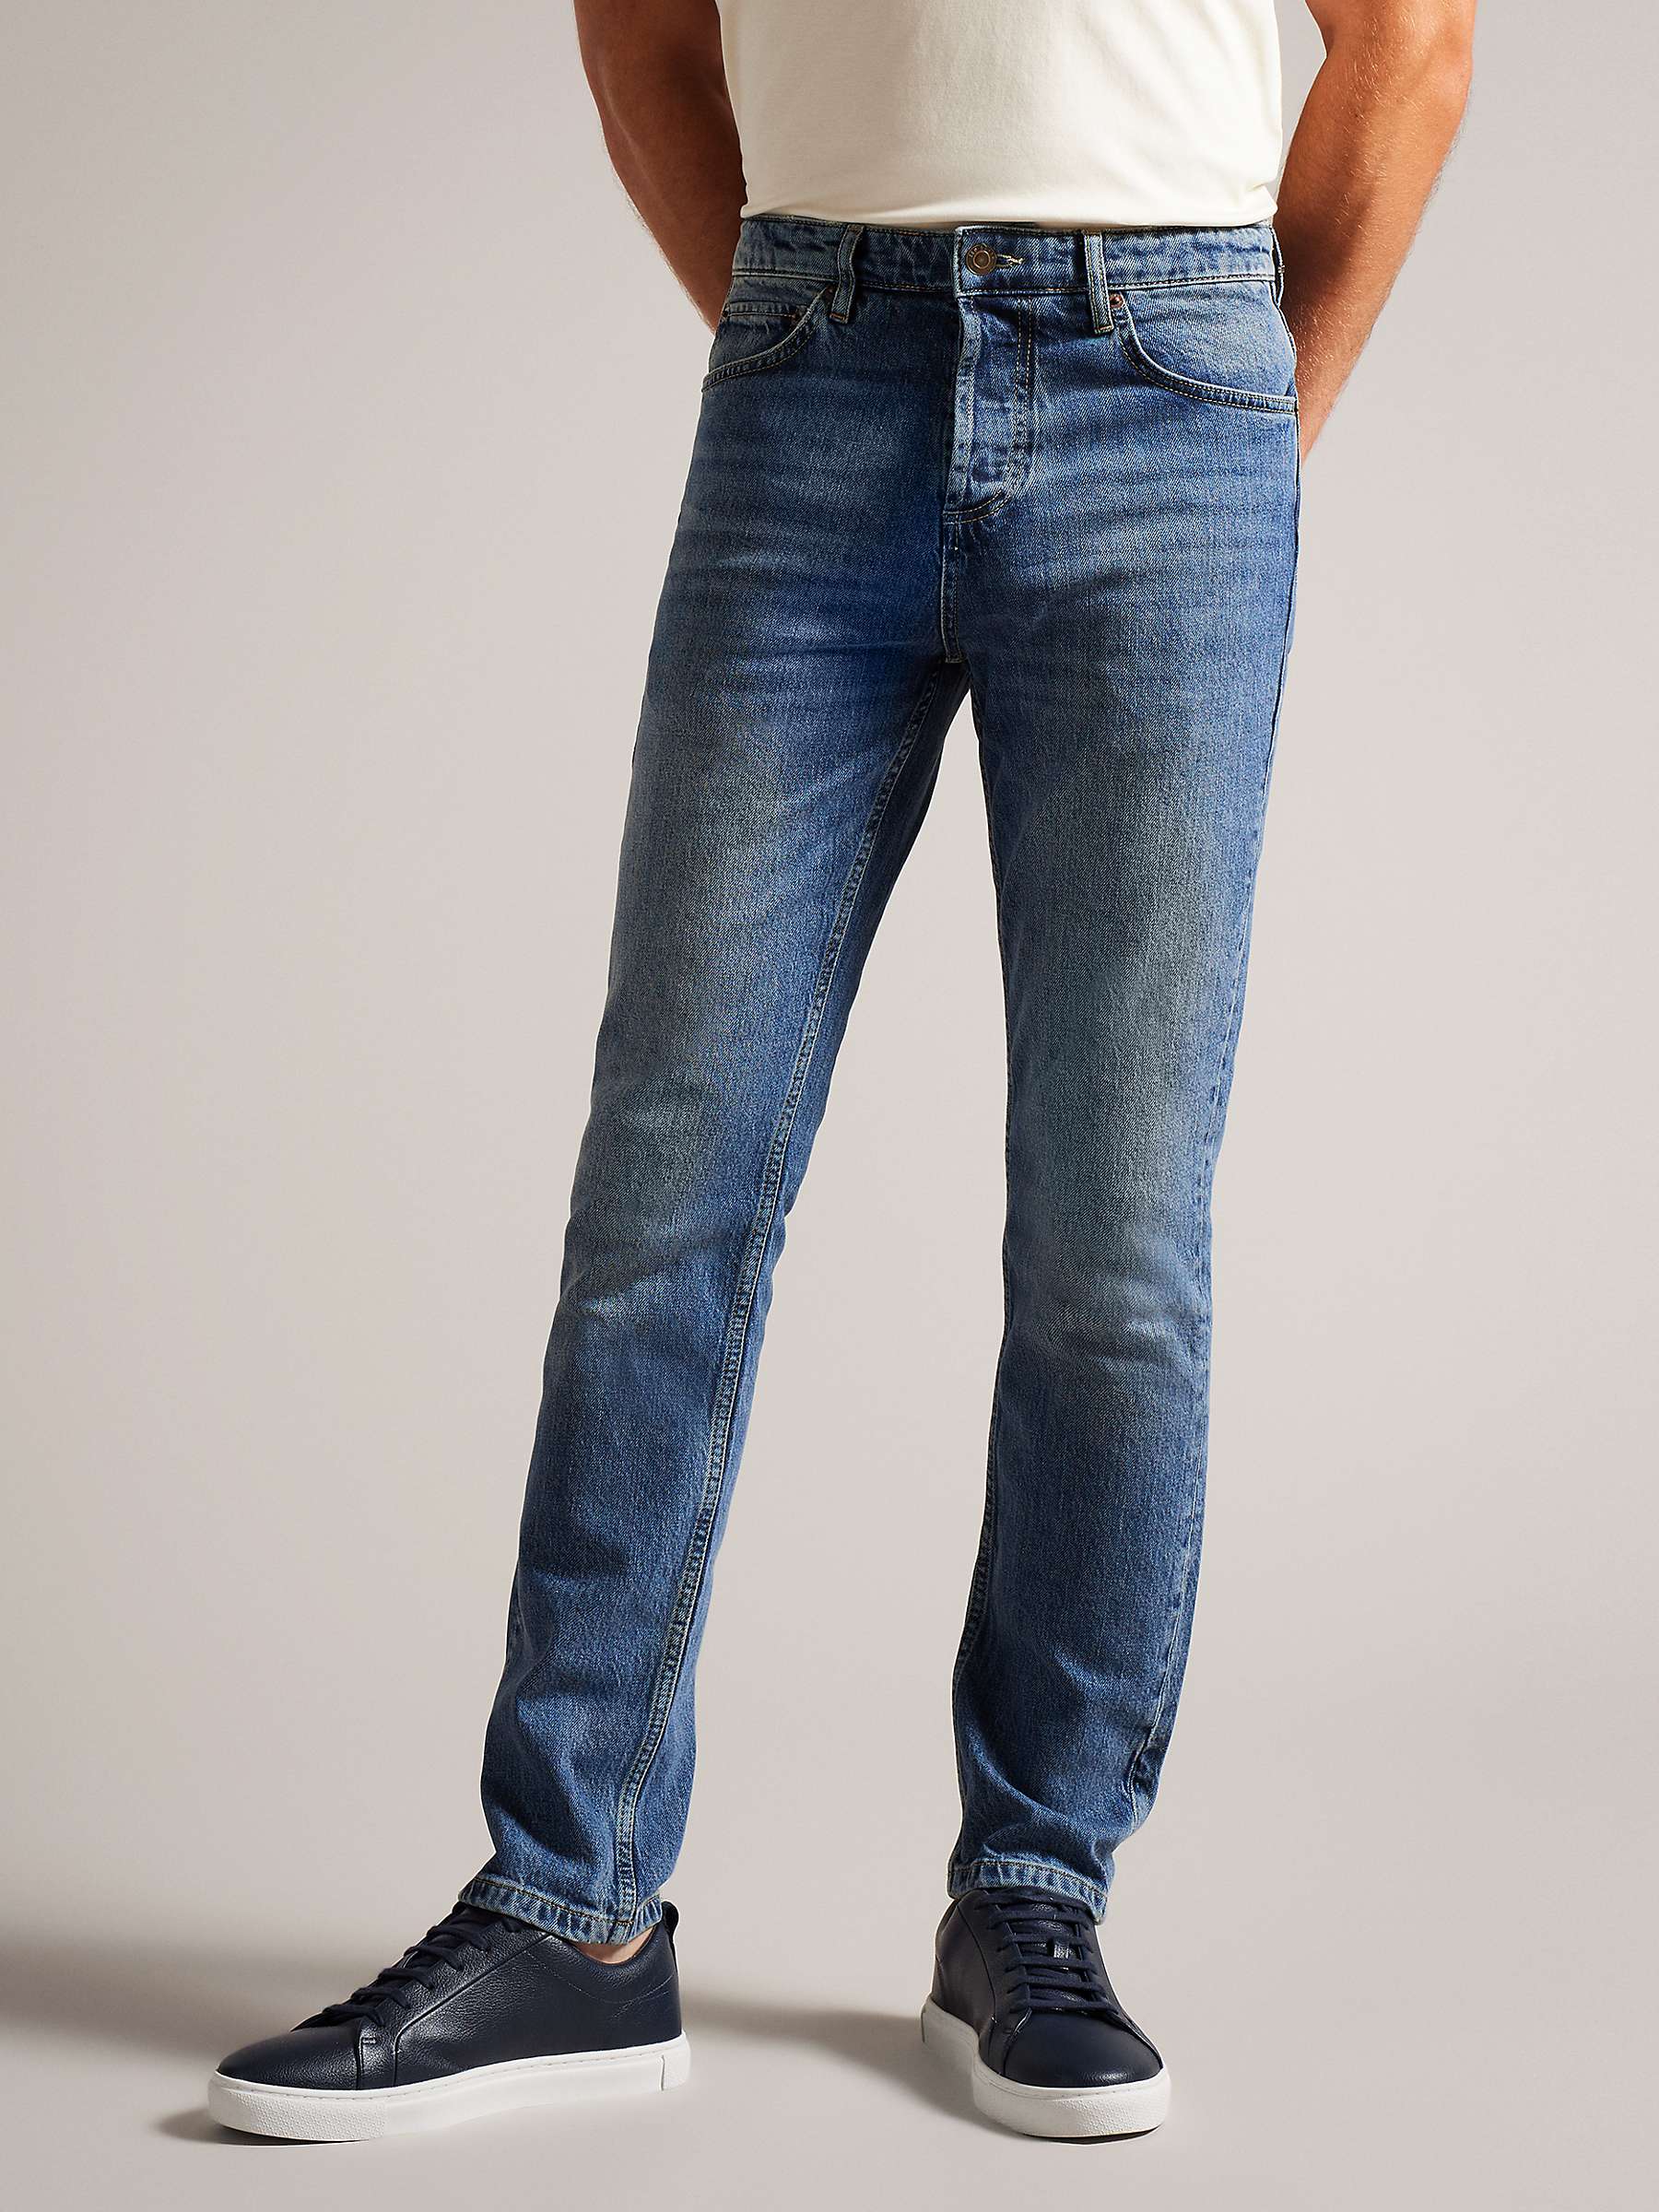 Buy Ted Baker Joeyy Straight Fit Stretch Jeans Online at johnlewis.com